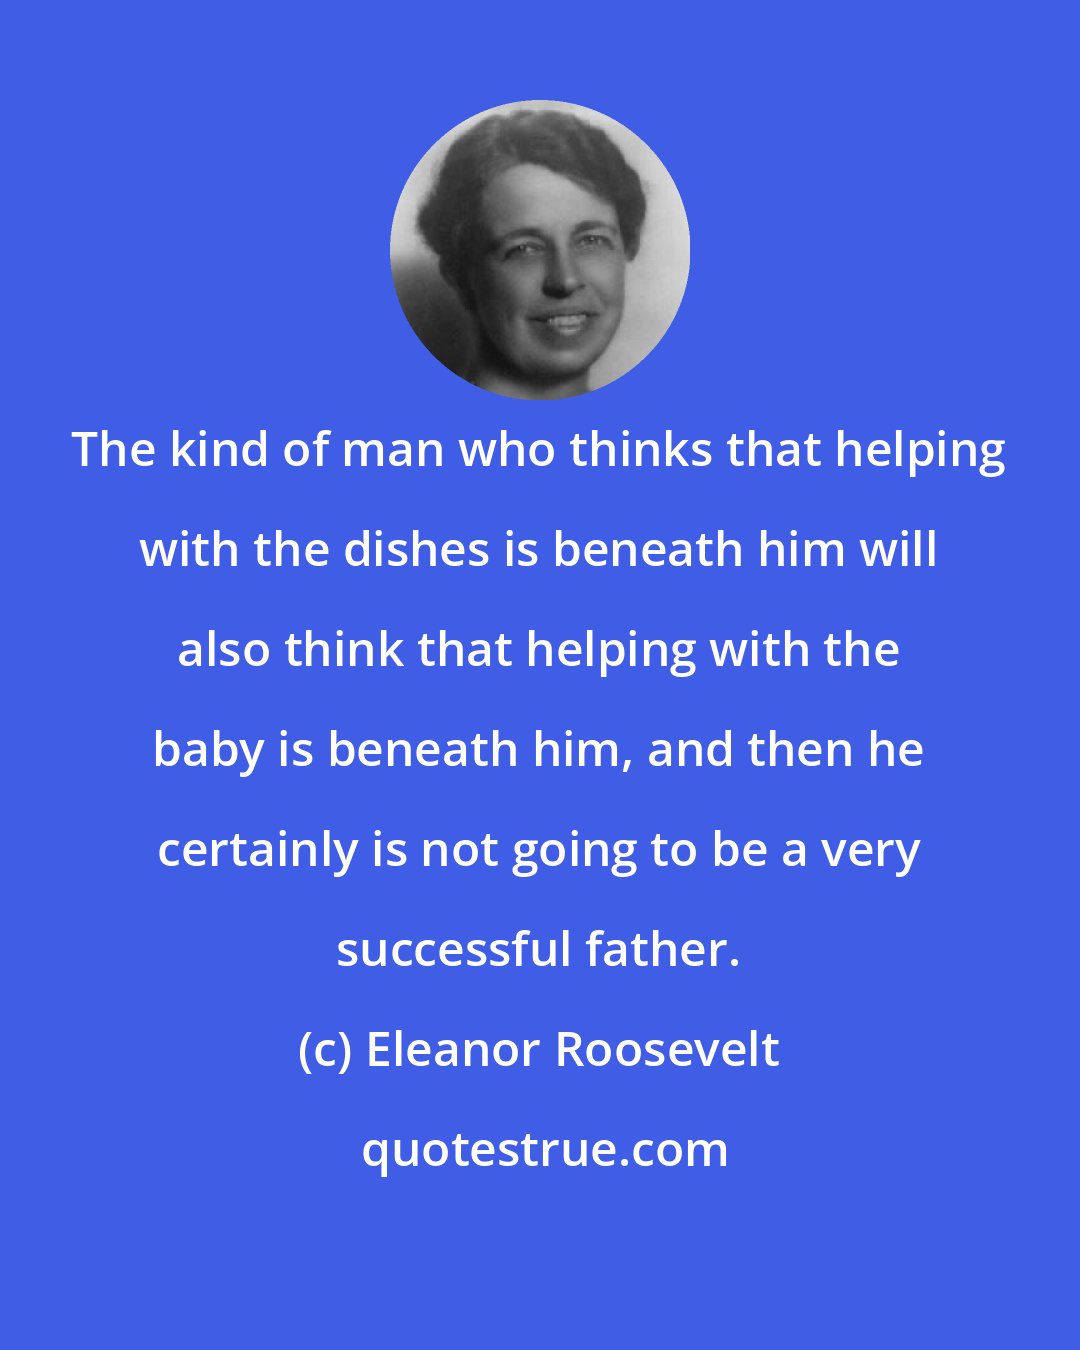 Eleanor Roosevelt: The kind of man who thinks that helping with the dishes is beneath him will also think that helping with the baby is beneath him, and then he certainly is not going to be a very successful father.